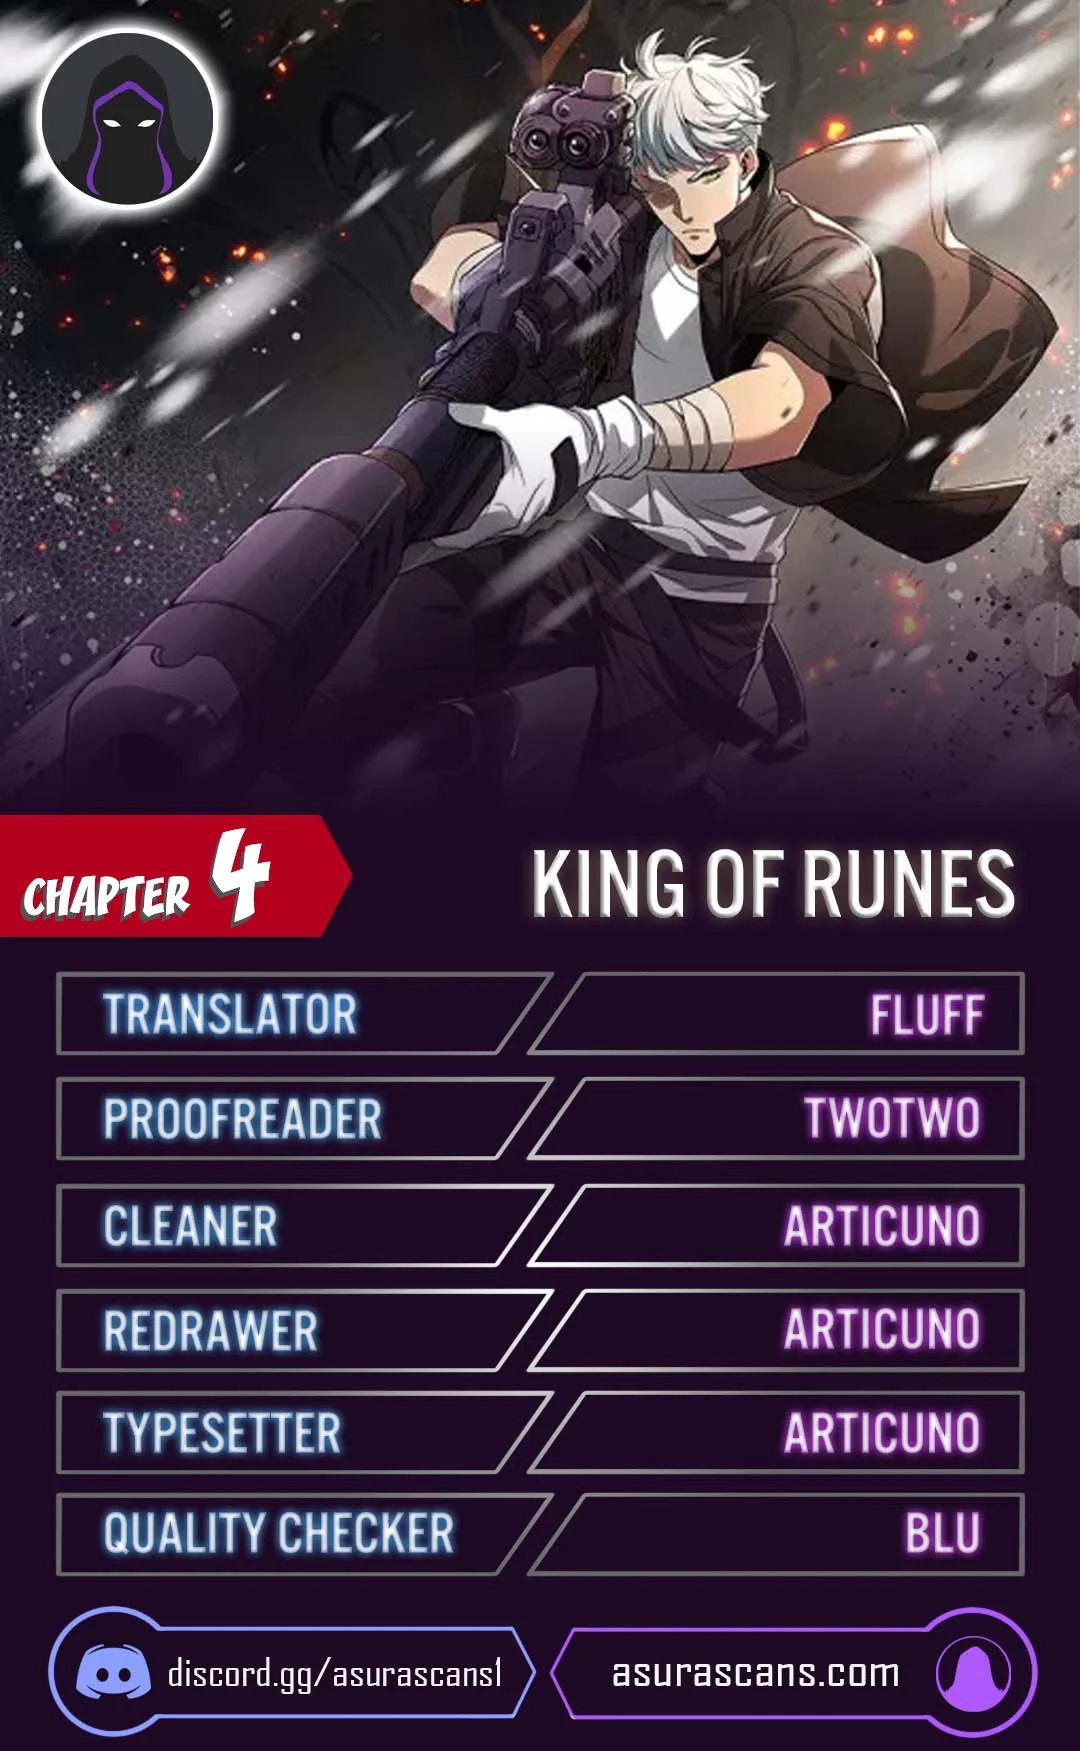 King of Runes Chapter 4